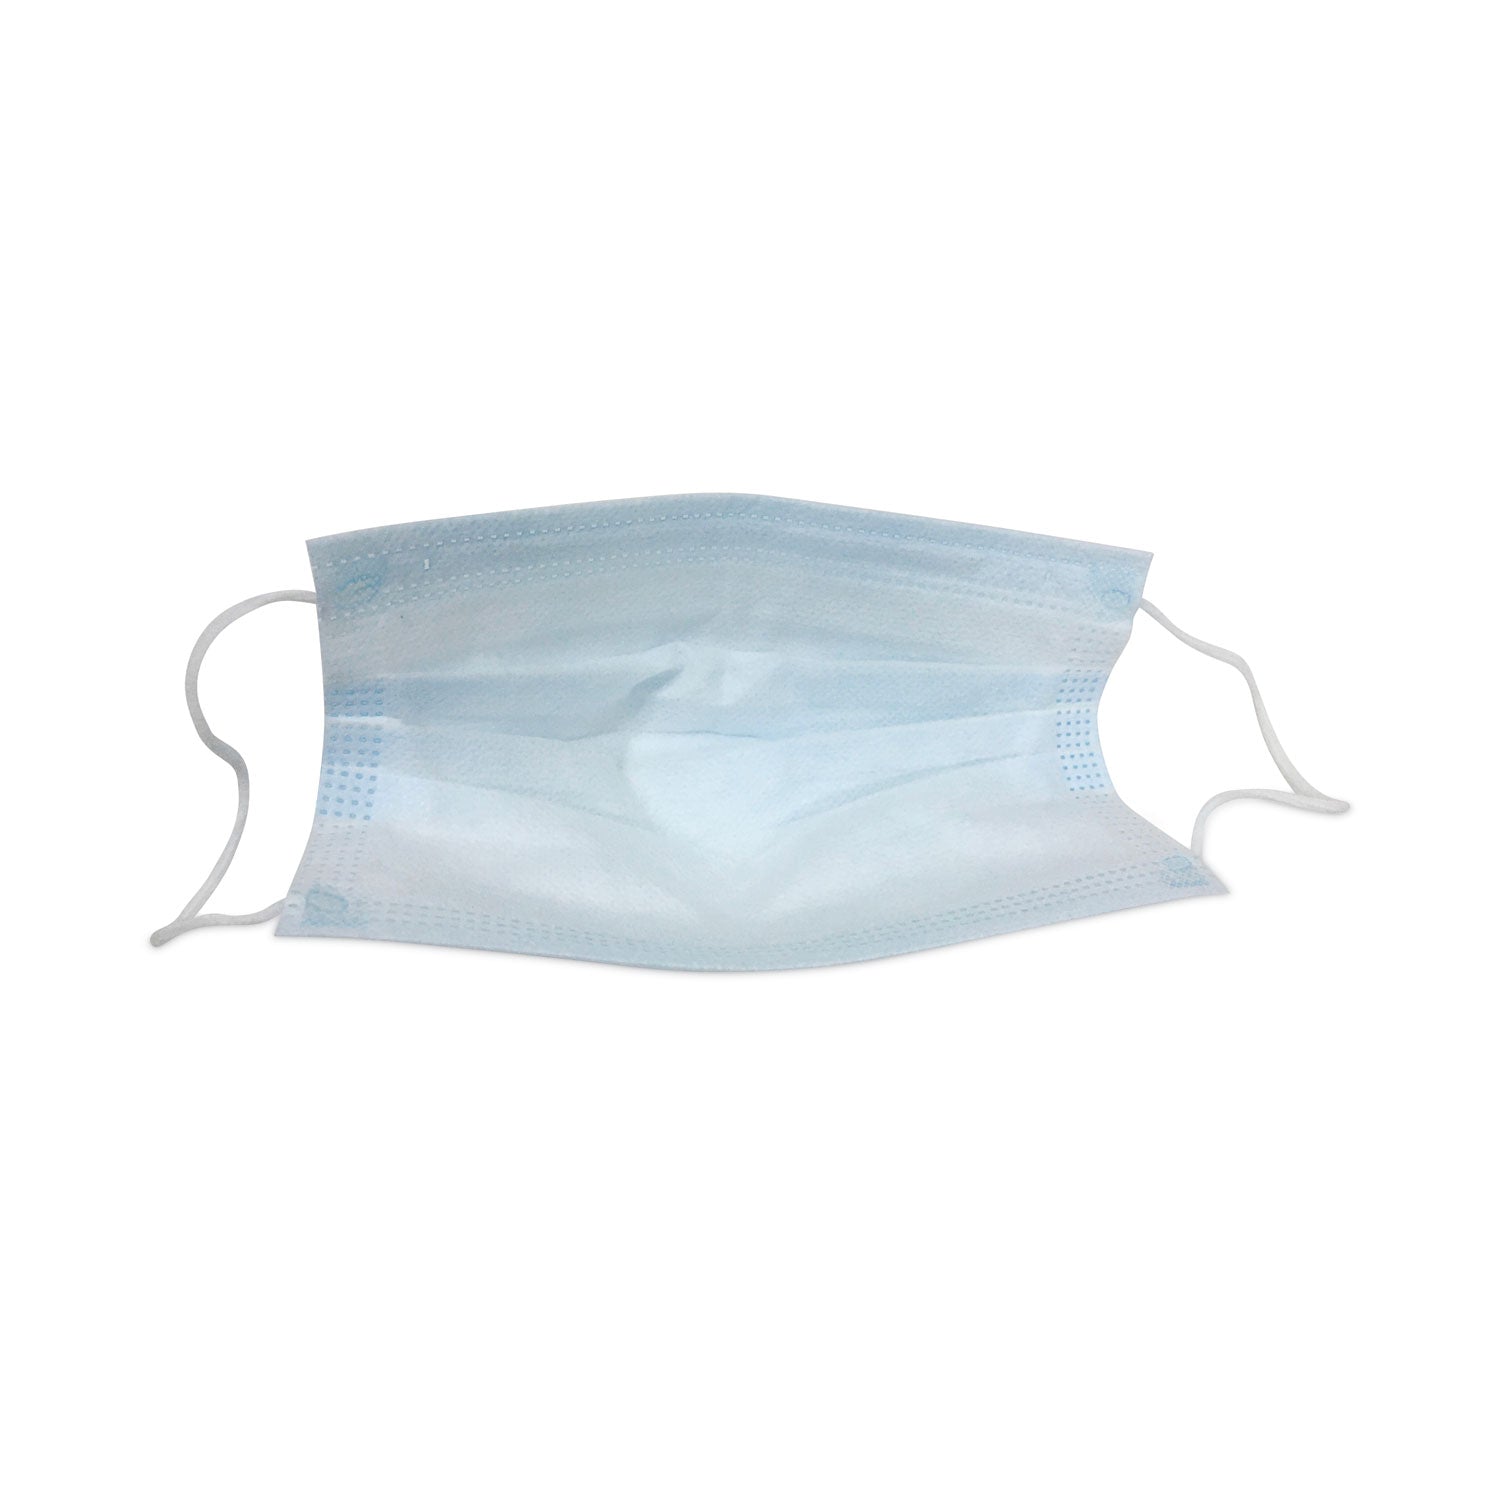 three-ply-general-use-face-mask-blue-white-2500-carton_tehms2500 - 3